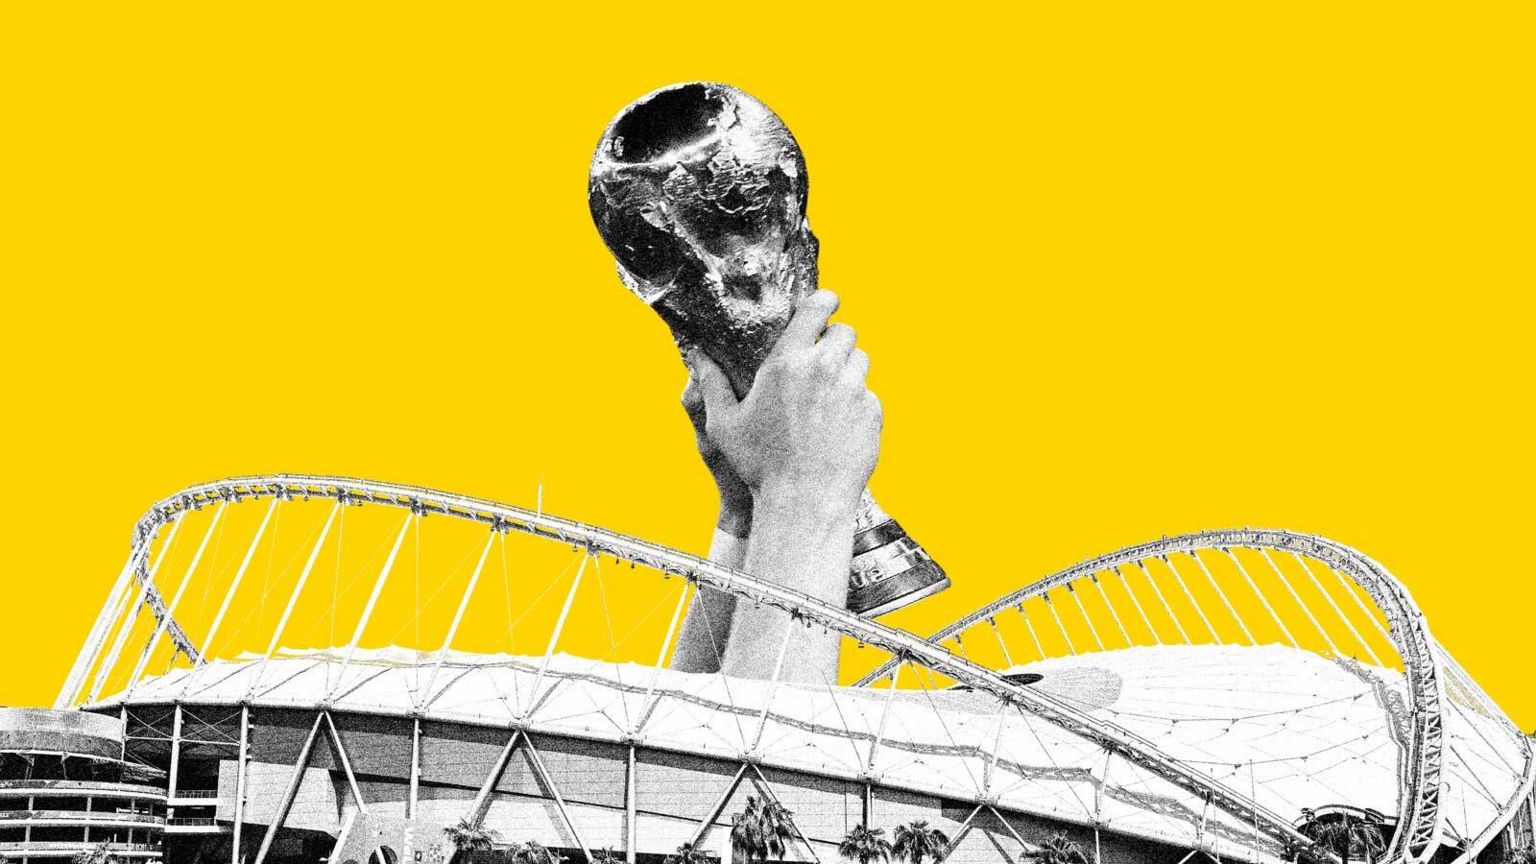 The world cup is held aloft above a stadium in this composite graphic set against a bright solid yellow